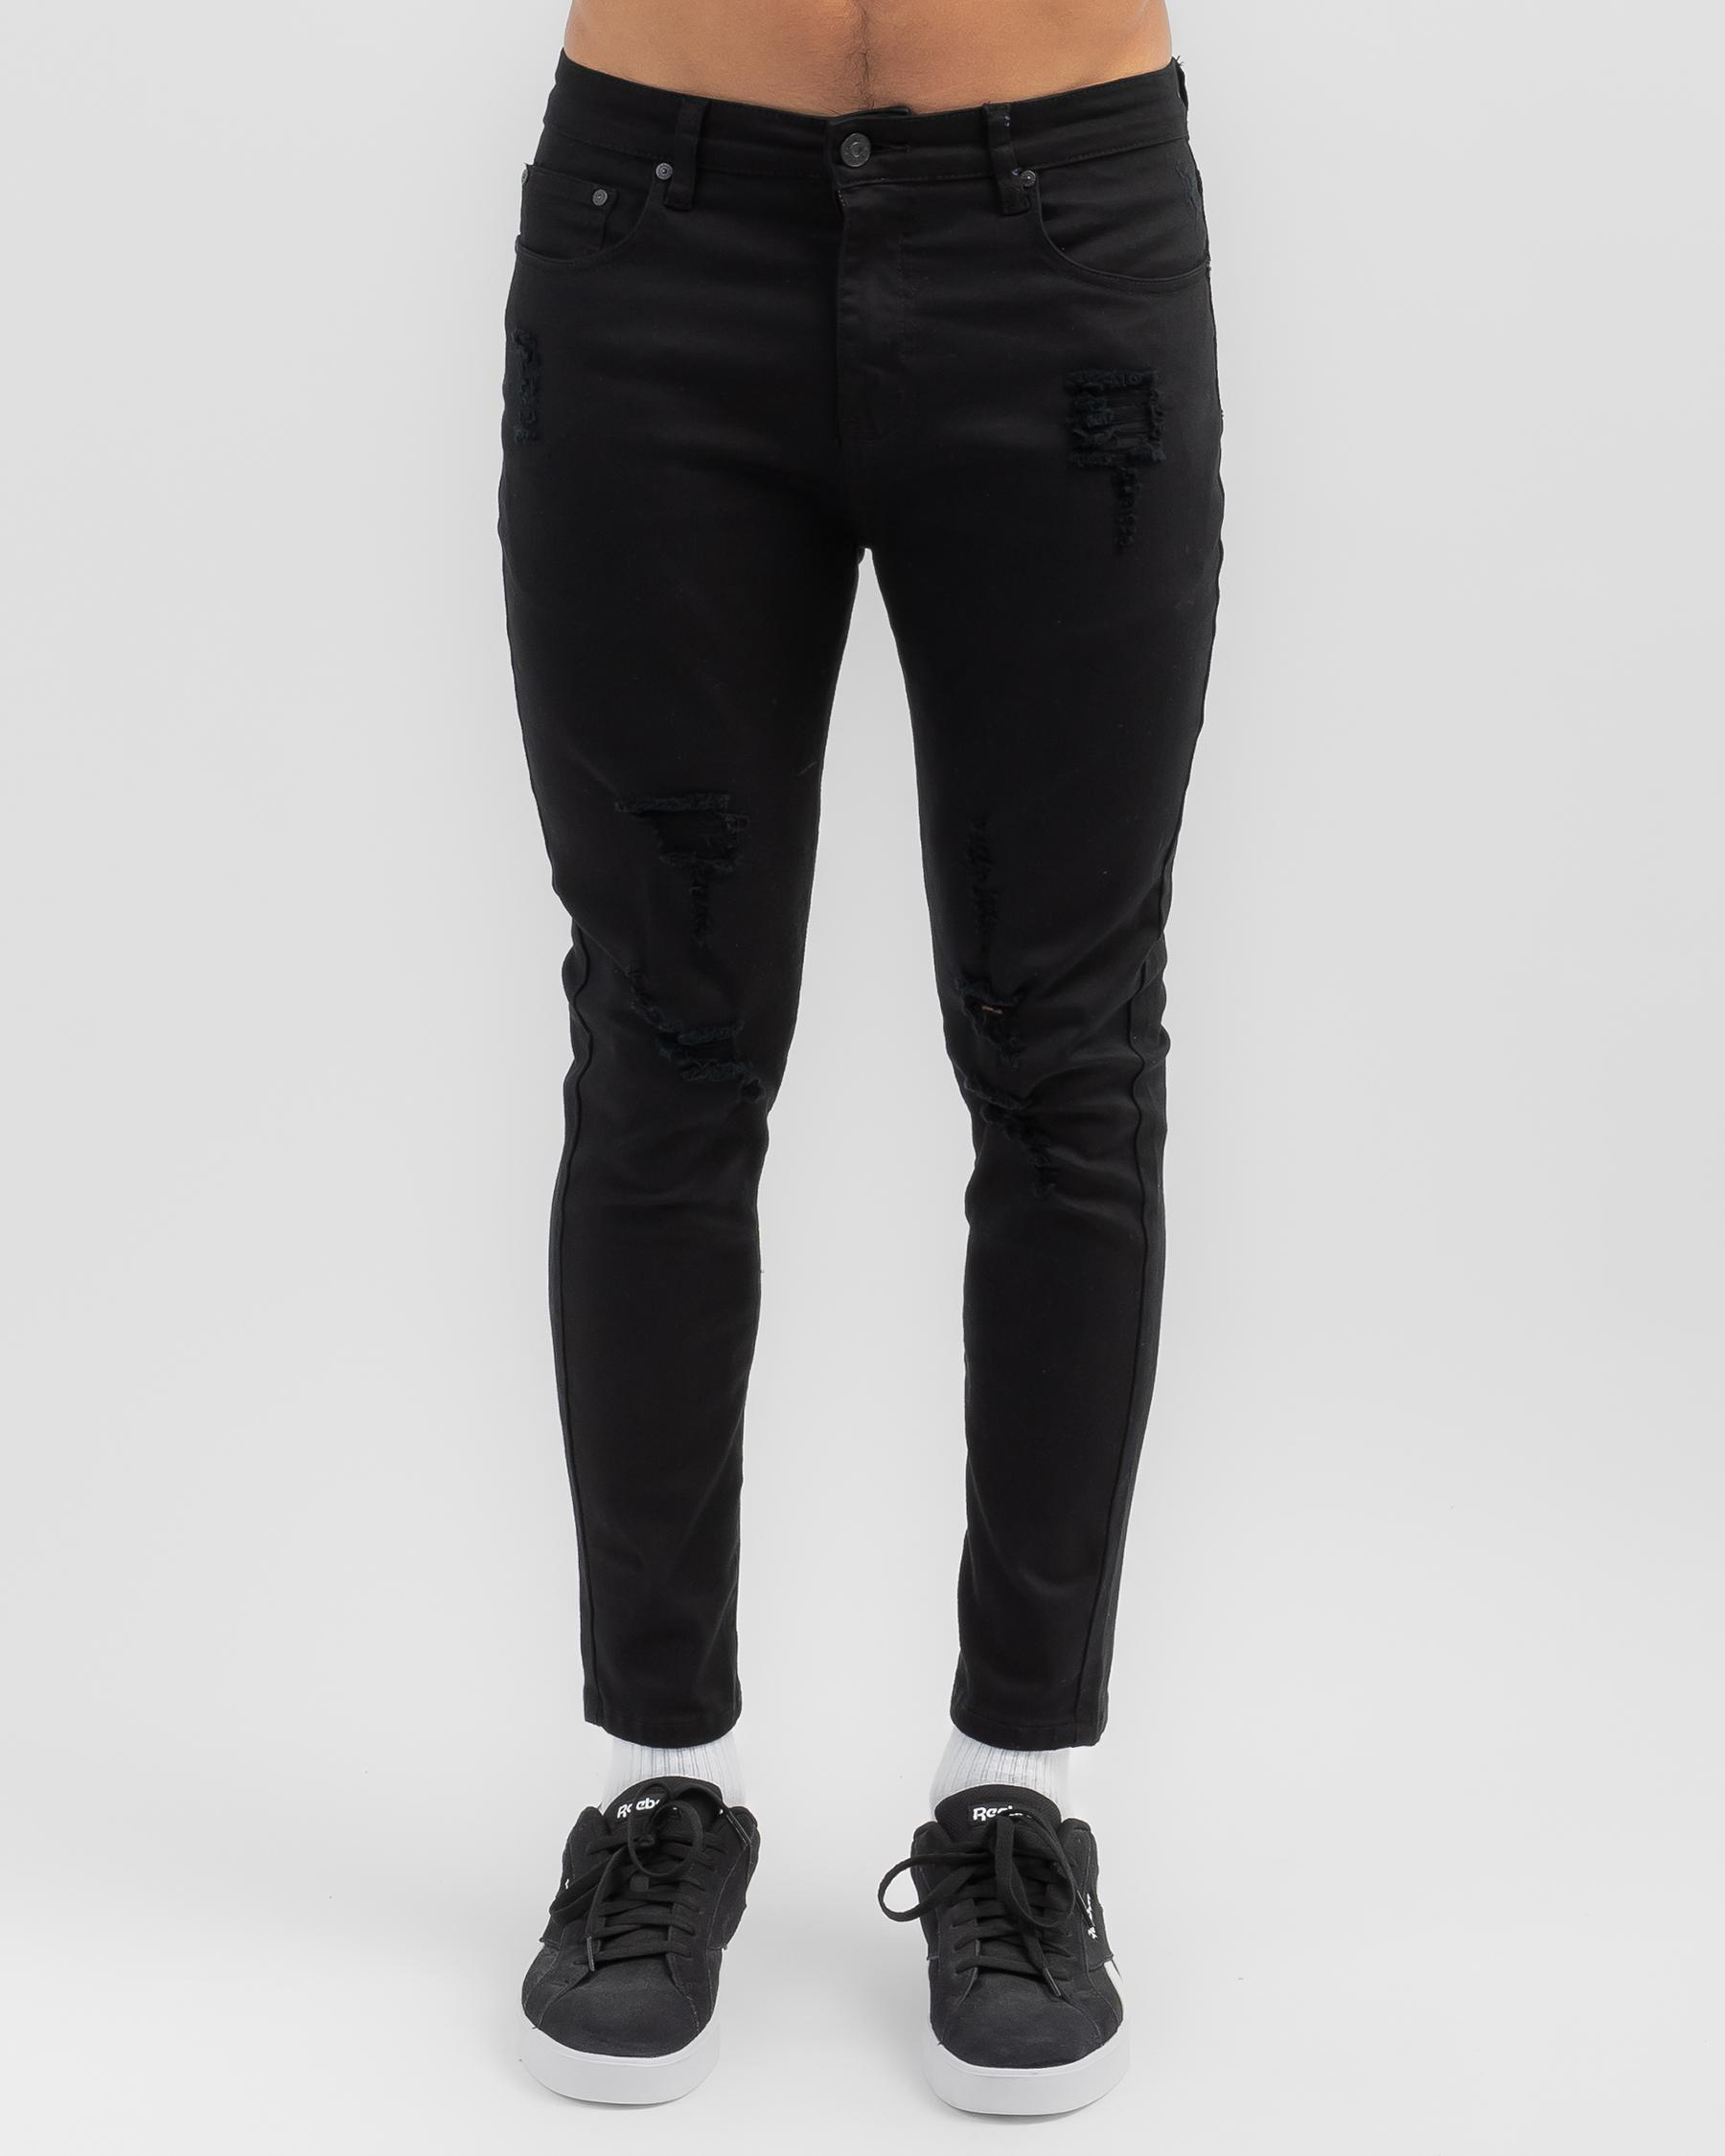 Shop Lucid Incognito Jeans In Black - Fast Shipping & Easy Returns ...